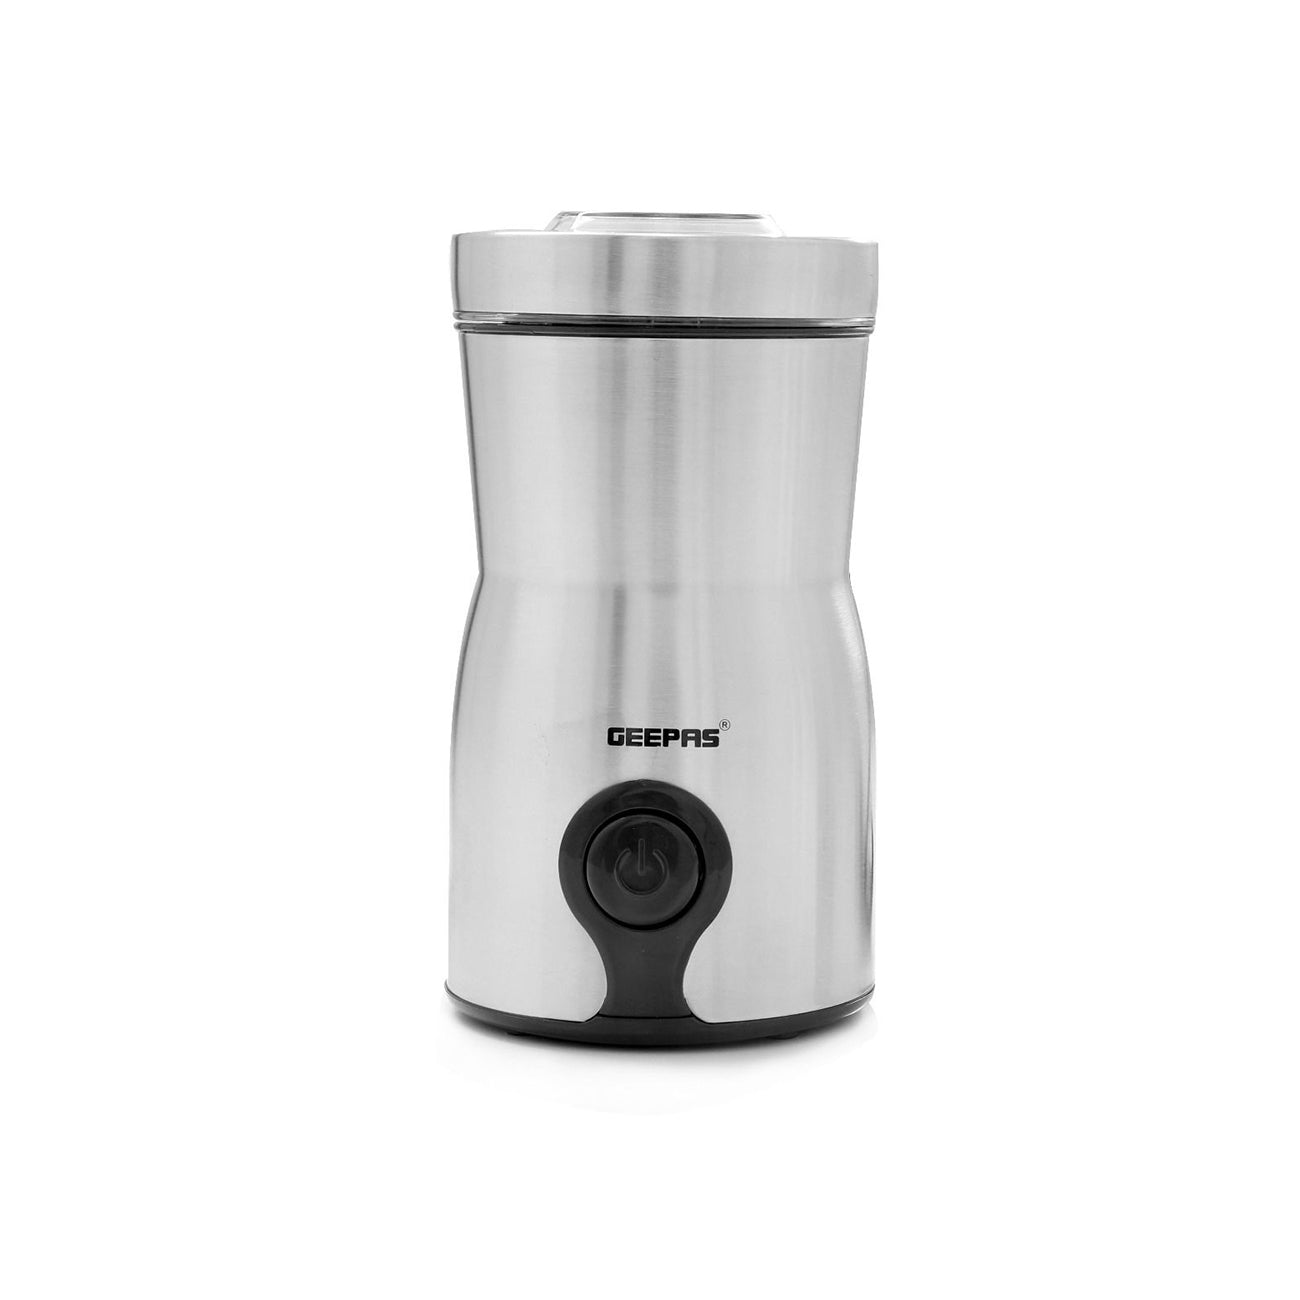 Geepas GCG5471 Coffee Grinder With Stainless Steel